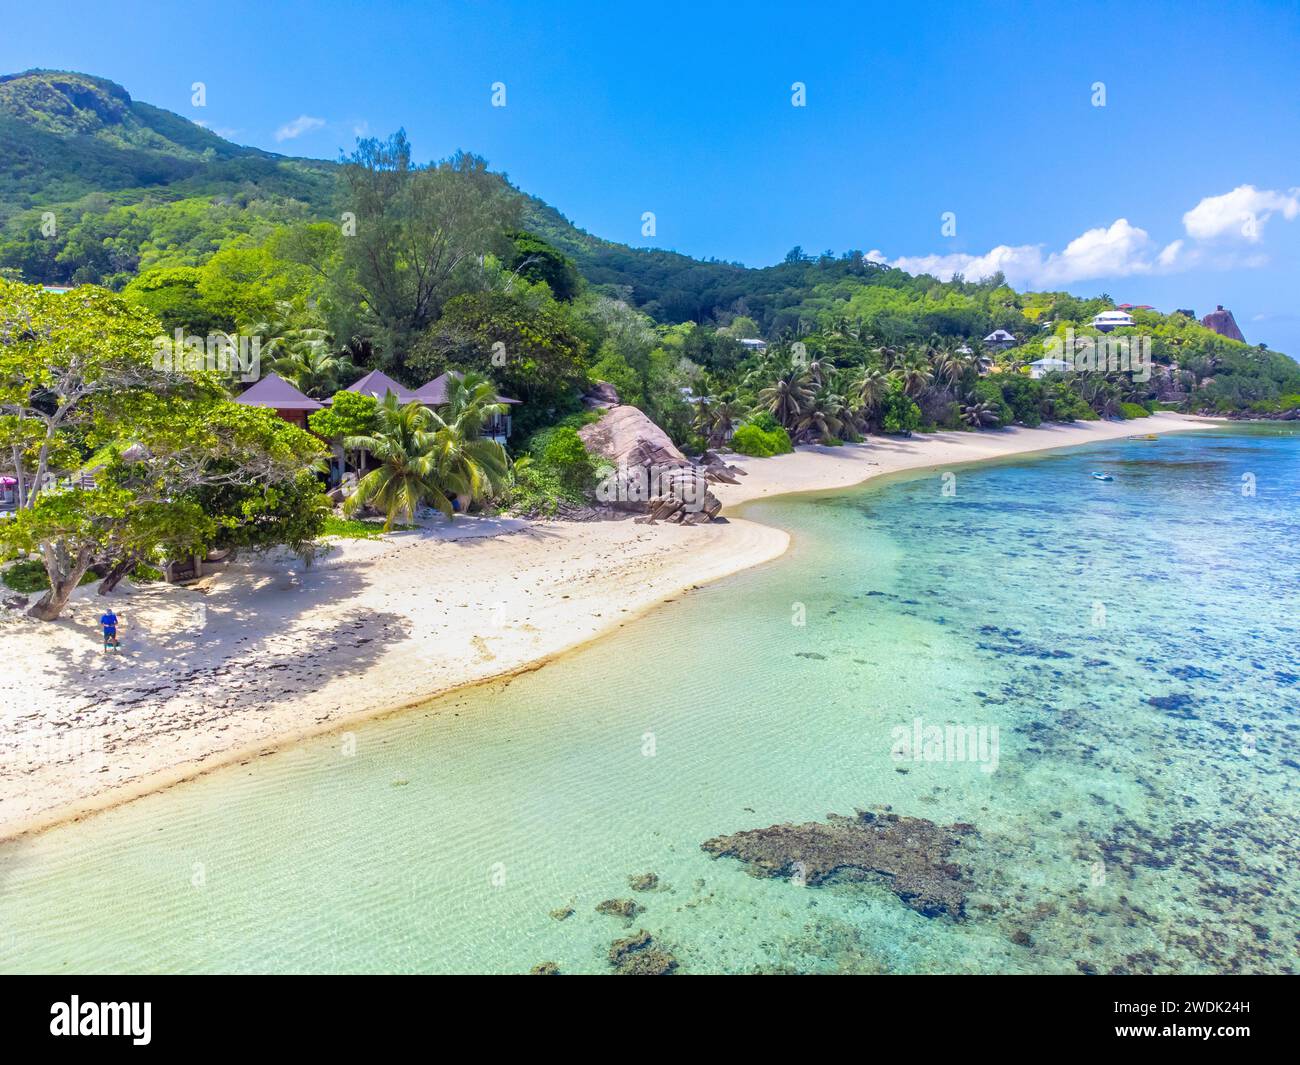 Aerial view of Anse Forbans shore in Mahe island, Seychelles Stock Photo